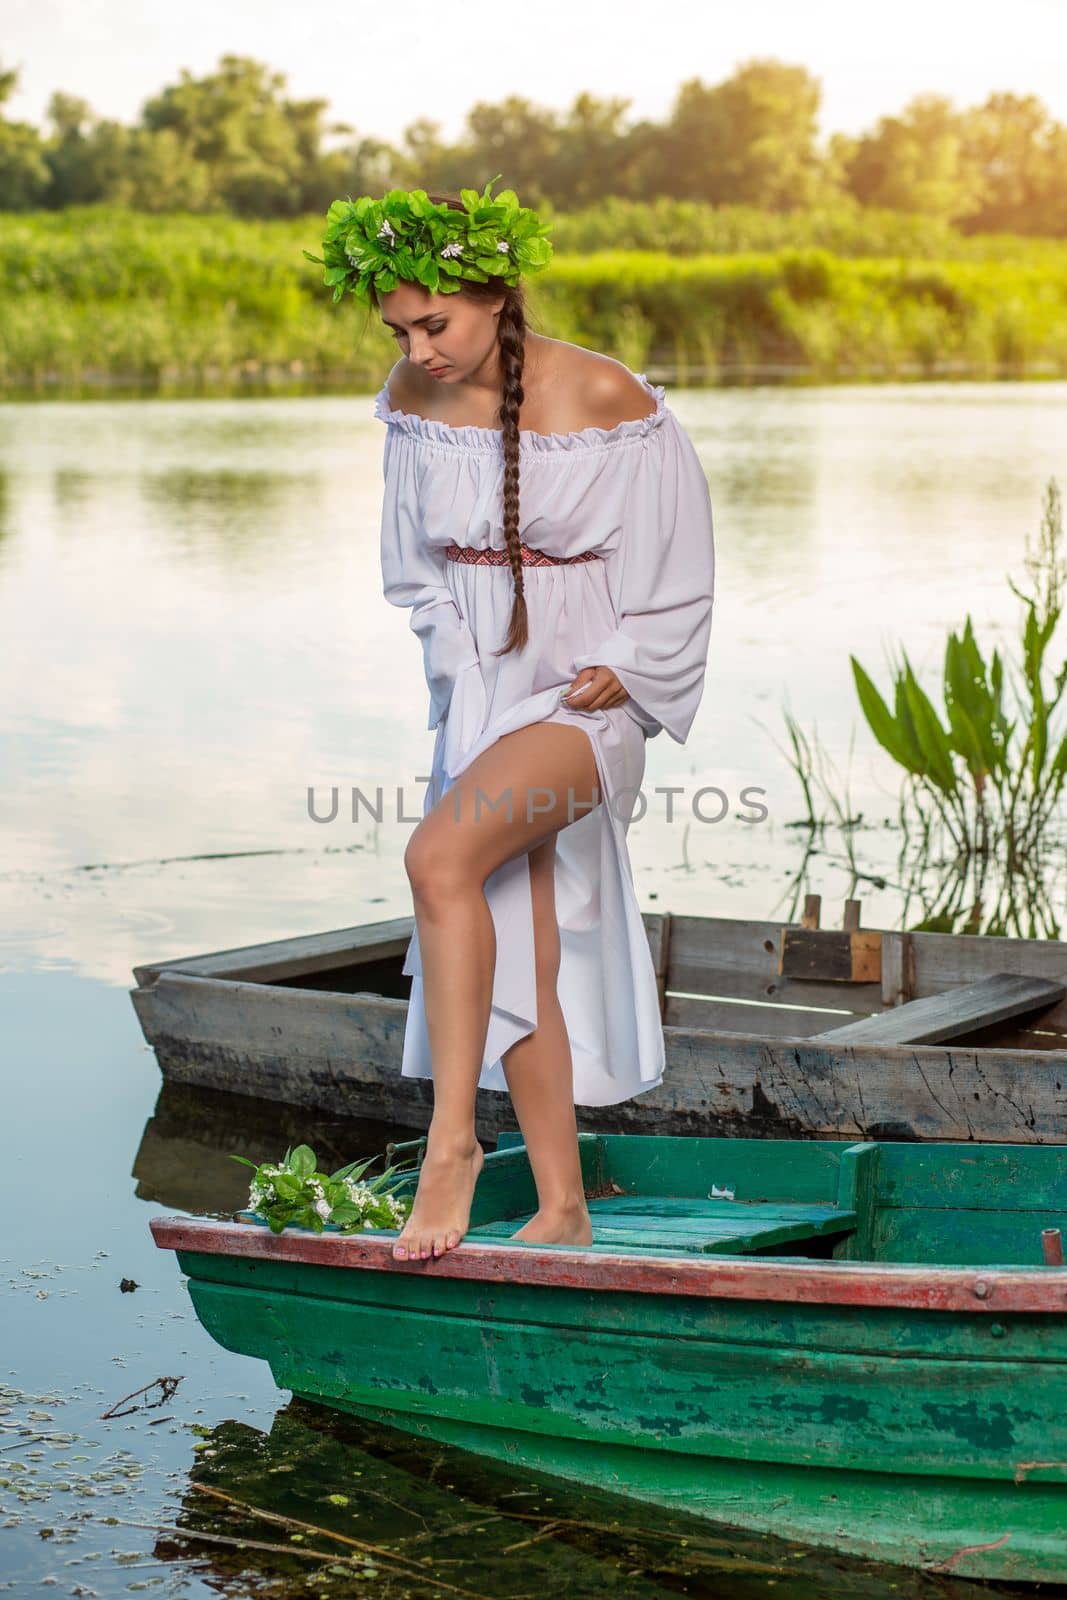 Young sexy woman on boat at sunset. The girl has a flower wreath on her head, relaxing and sailing on river. Beautiful body and face. Fantasy art photography. Concept of female beauty, rest in the village